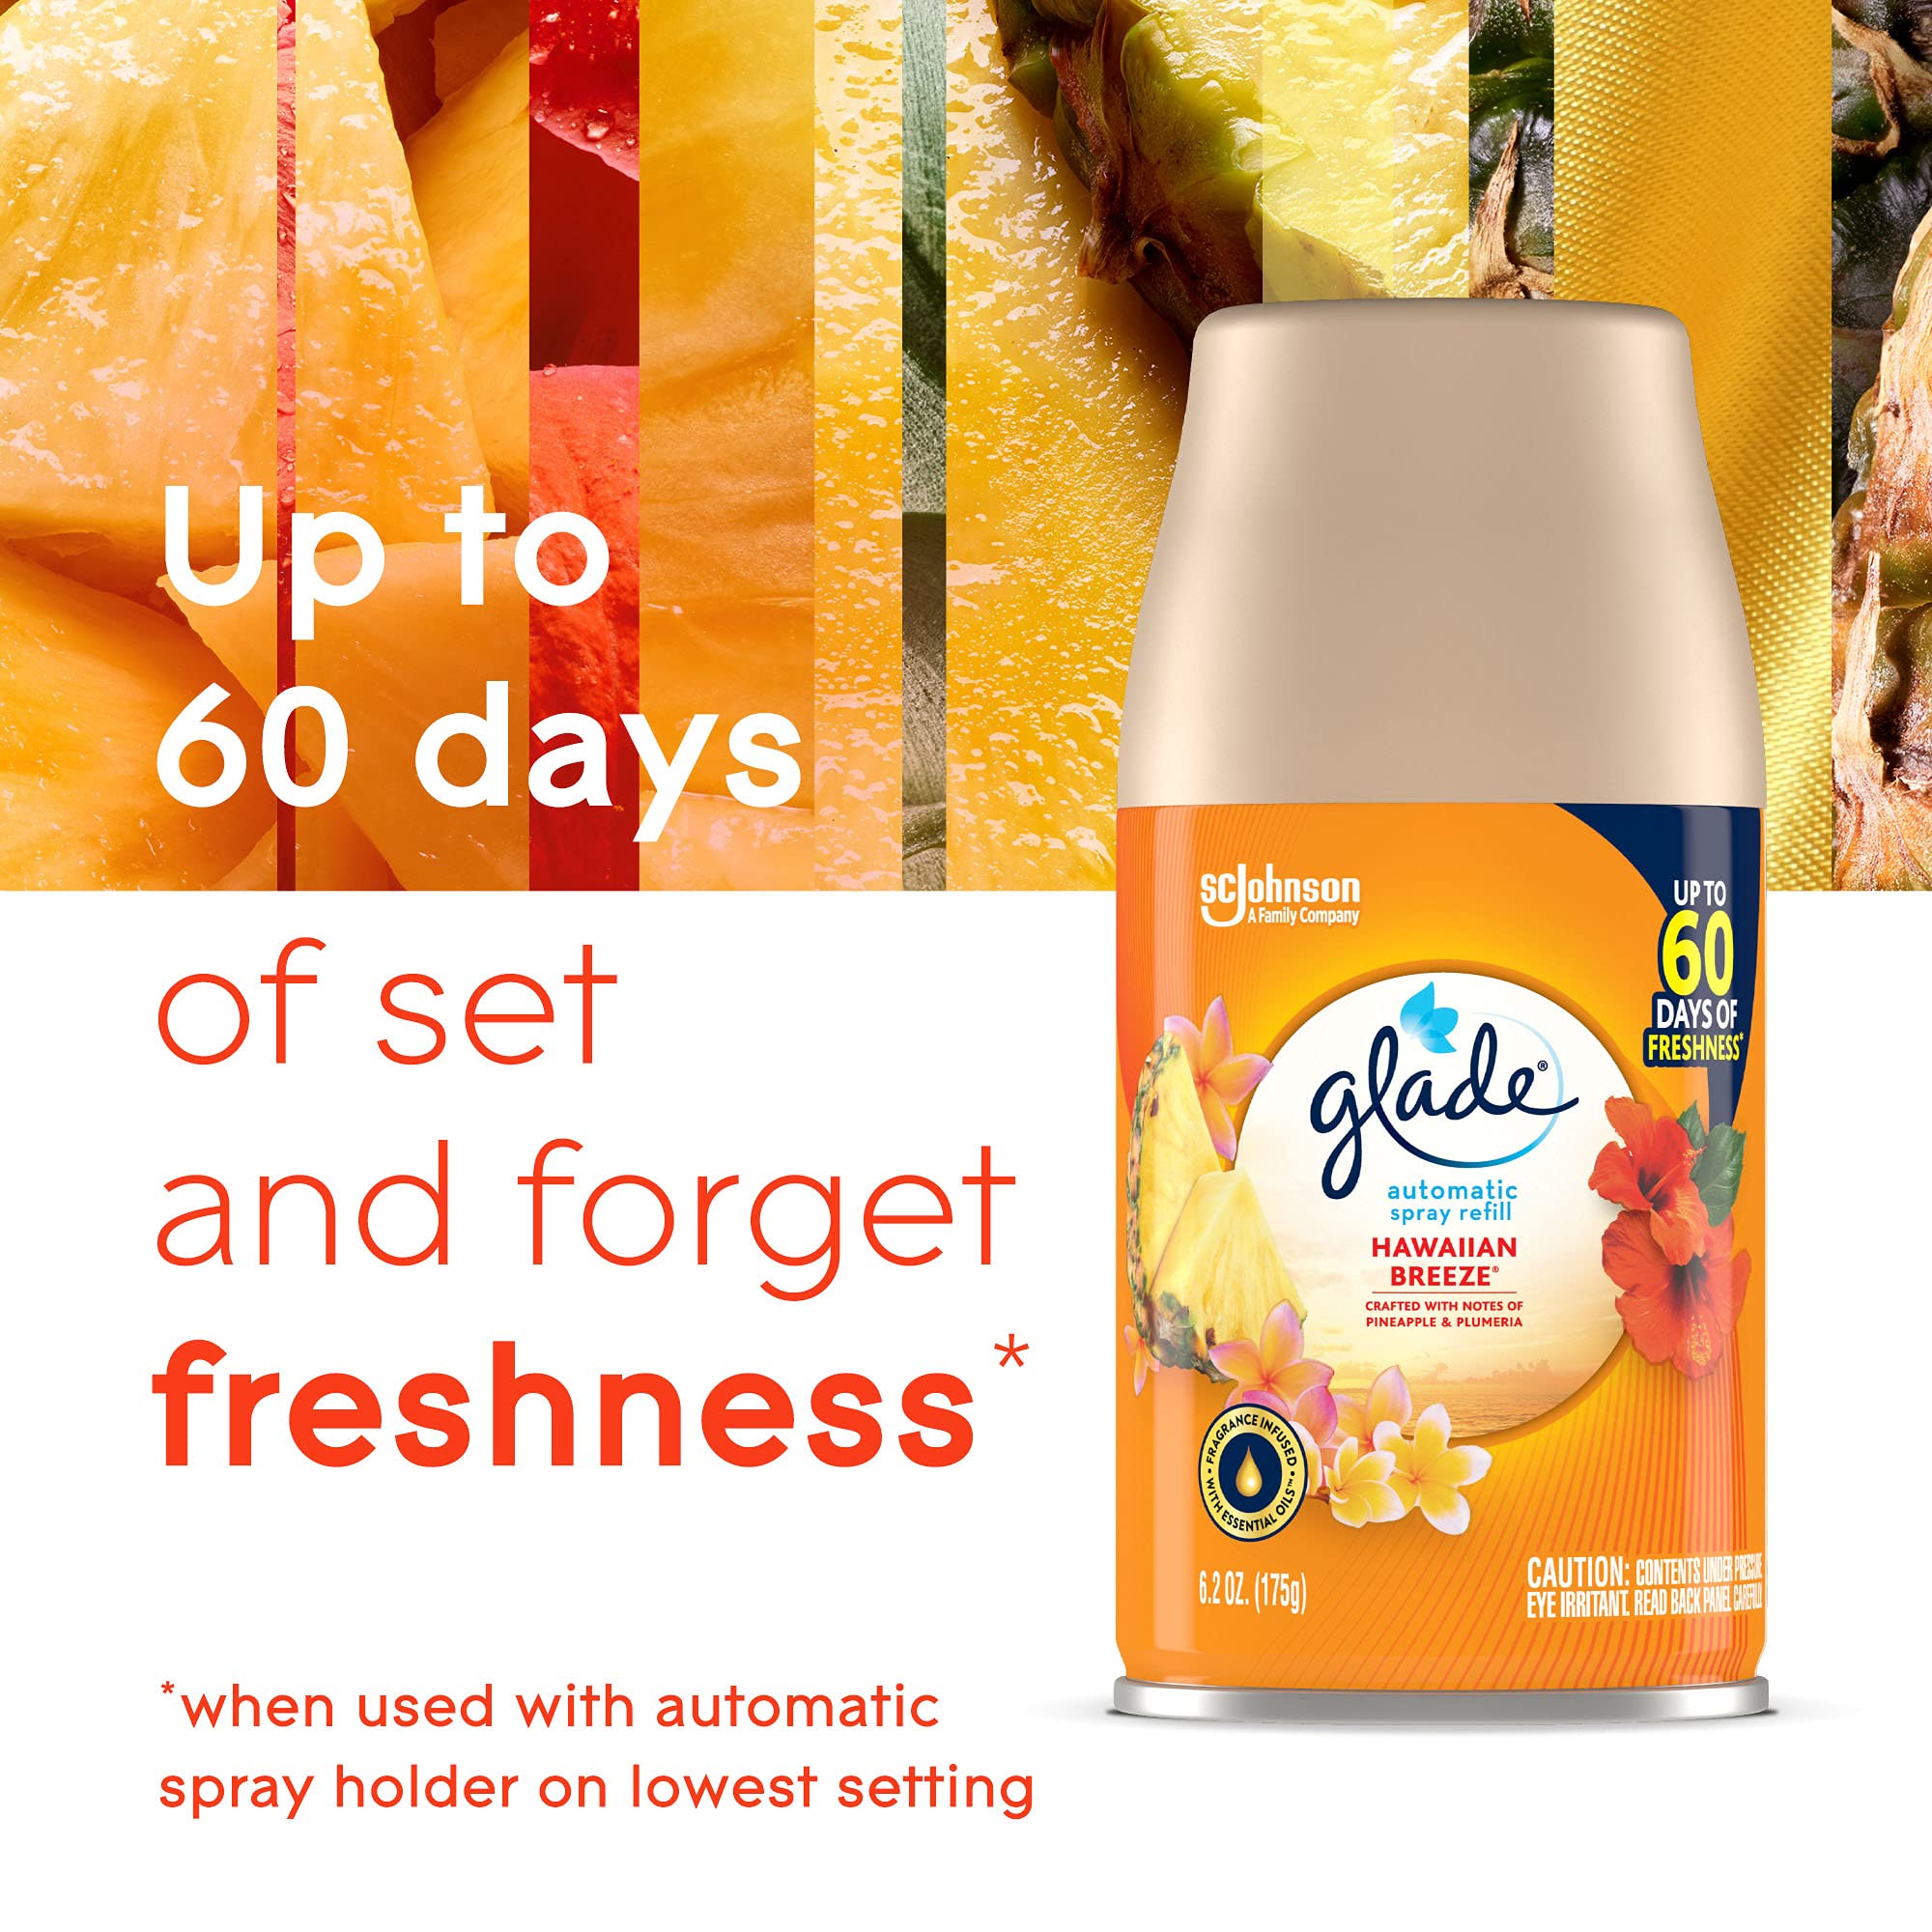 Glade Automatic Spray Refill, Air Freshener for Home and Bathroom, Hawaiian Breeze, 6.2 Oz, 2 Count